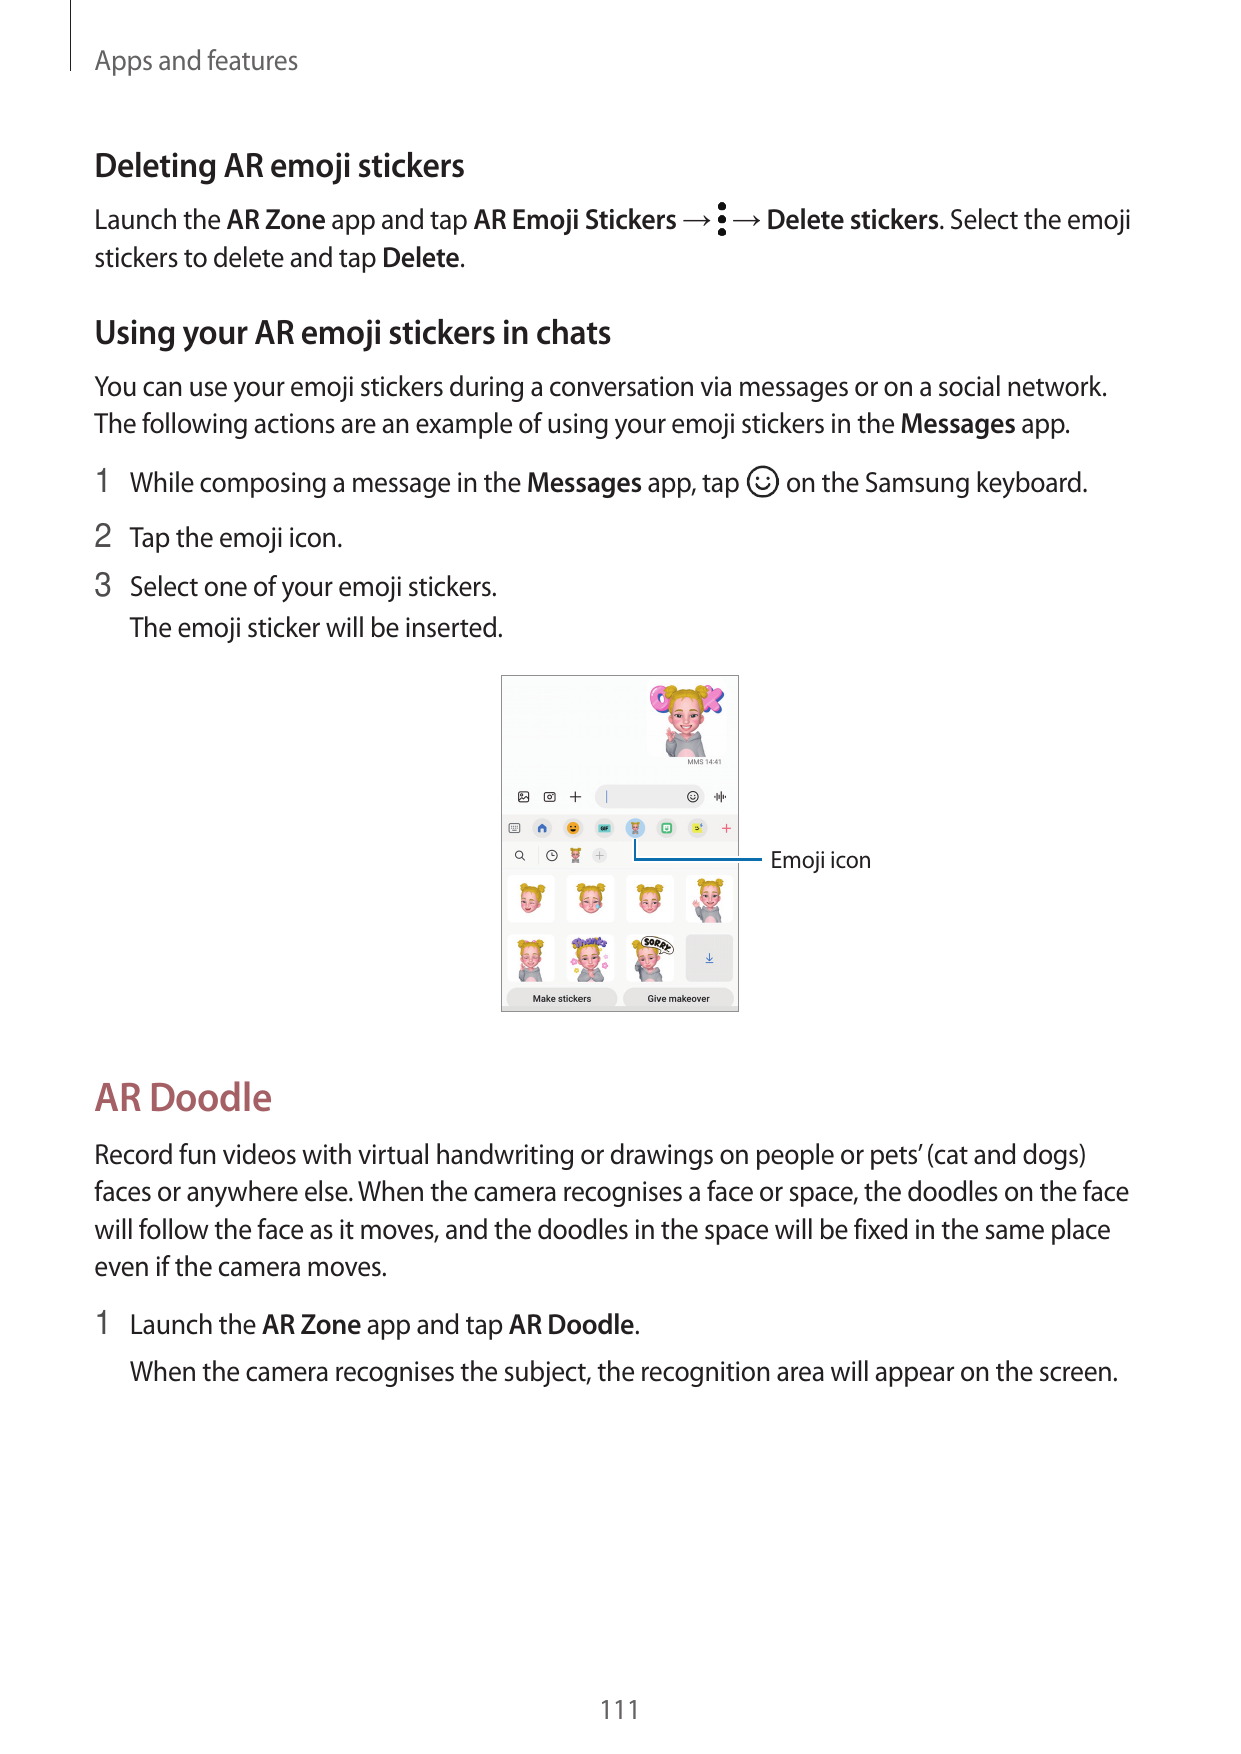 Apps and featuresDeleting AR emoji stickersLaunch the AR Zone app and tap AR Emoji Stickers → → Delete stickers. Select the emoj